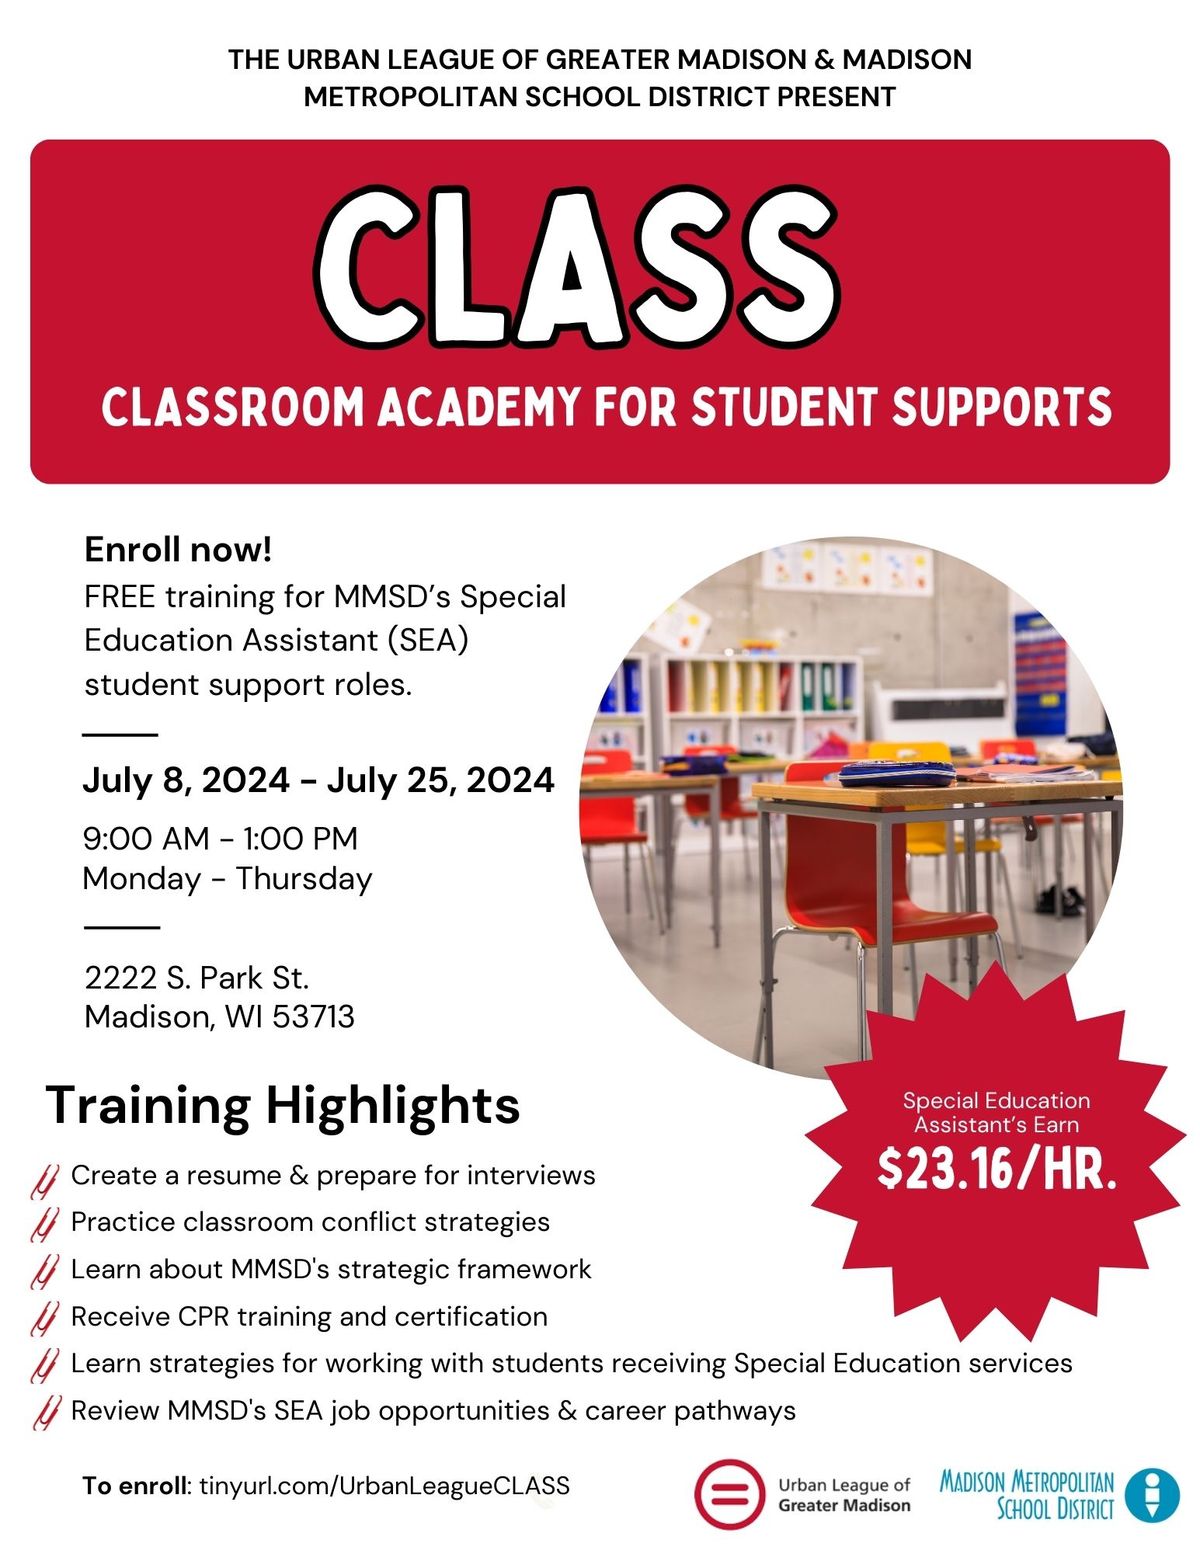 ULGM & MMSD's - Classroom Academy for Student Supports